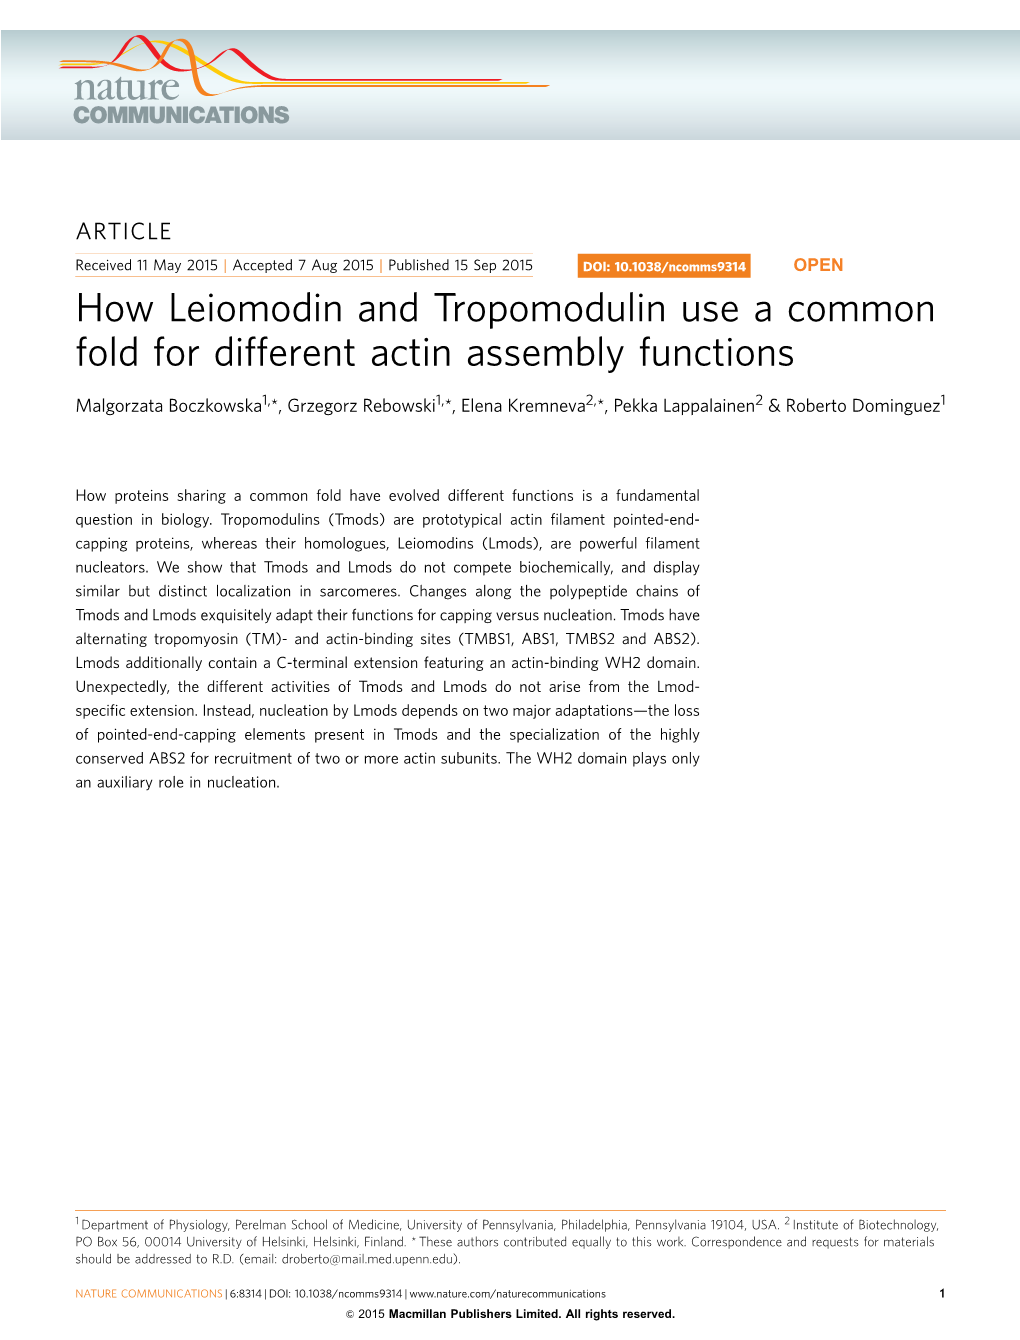 How Leiomodin and Tropomodulin Use a Common Fold for Different Actin Assembly Functions